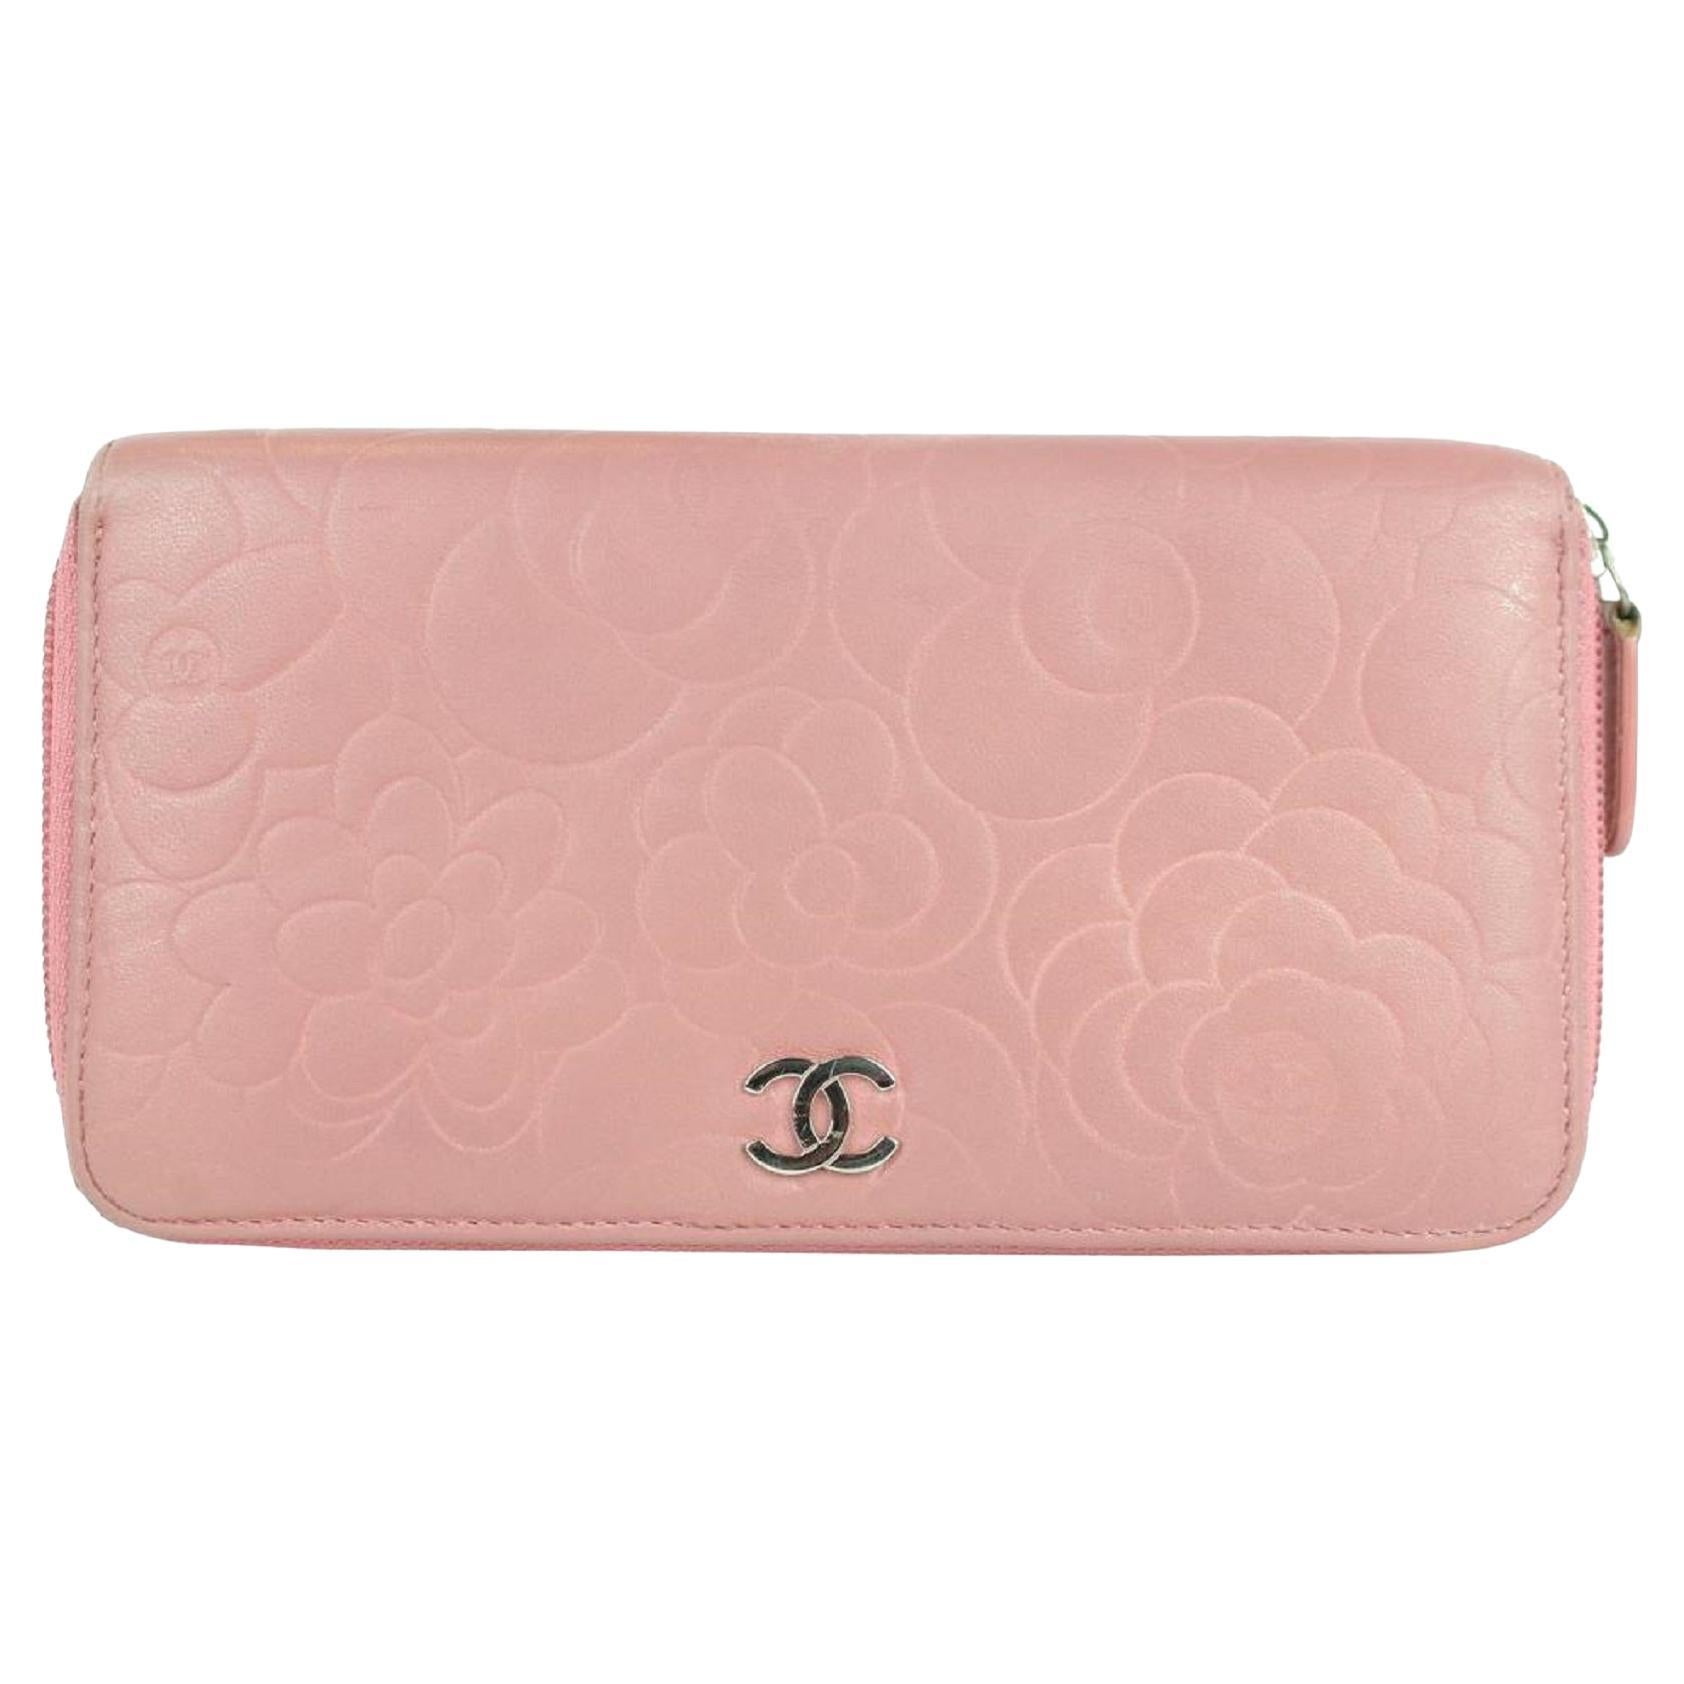 Chanel Embossed Camellia Gusset Zip Around Wallet 2cj1110 Pink Leather Clutch